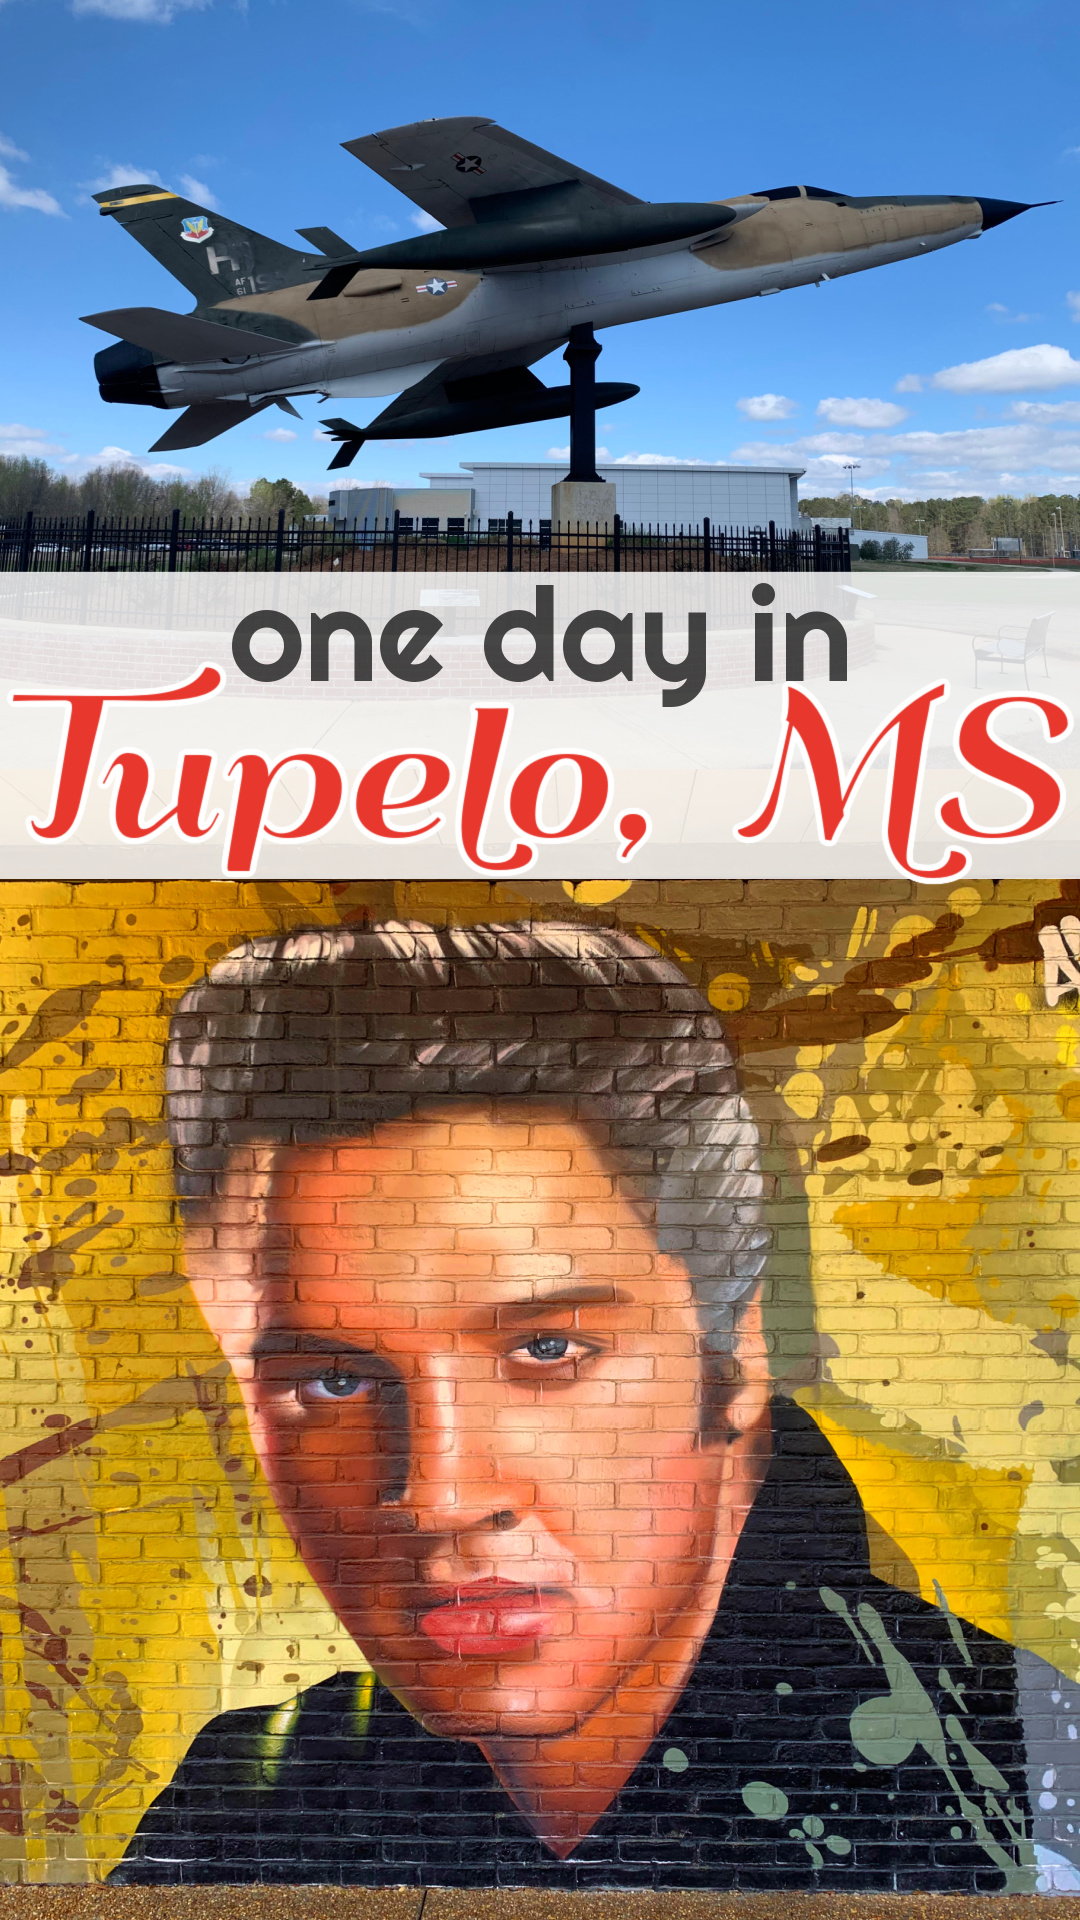 Elvis, Food, Tours: Tupelo Ms in 24 Hours photo collage.